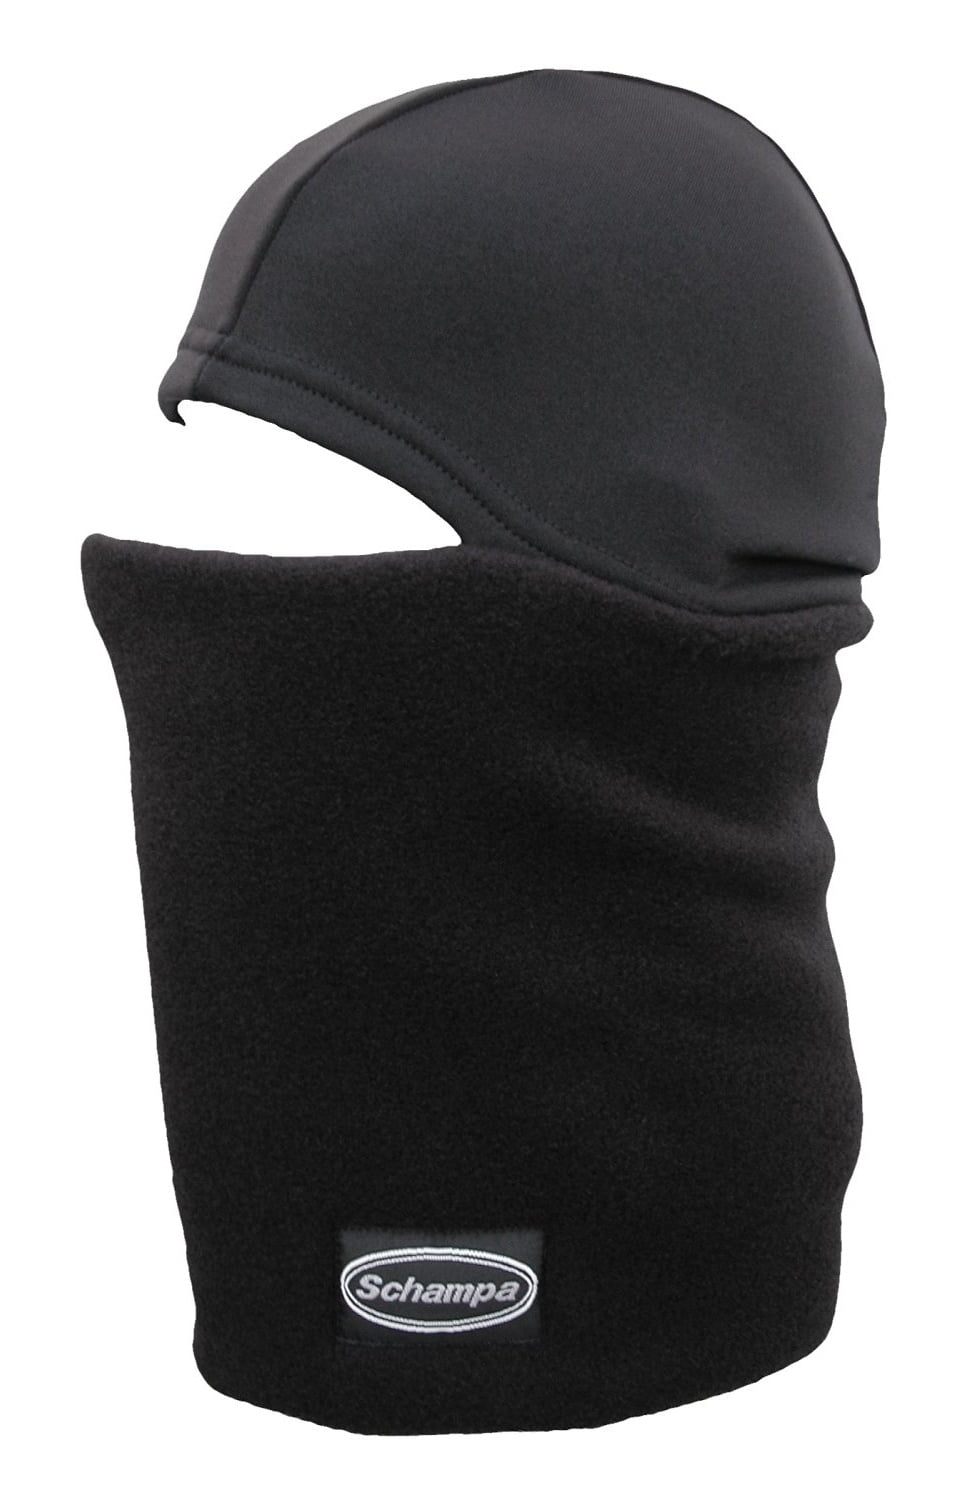 Schampa Black Short Fleece Neck Dickie One Size Motorcycle Cold Weather Coverage 